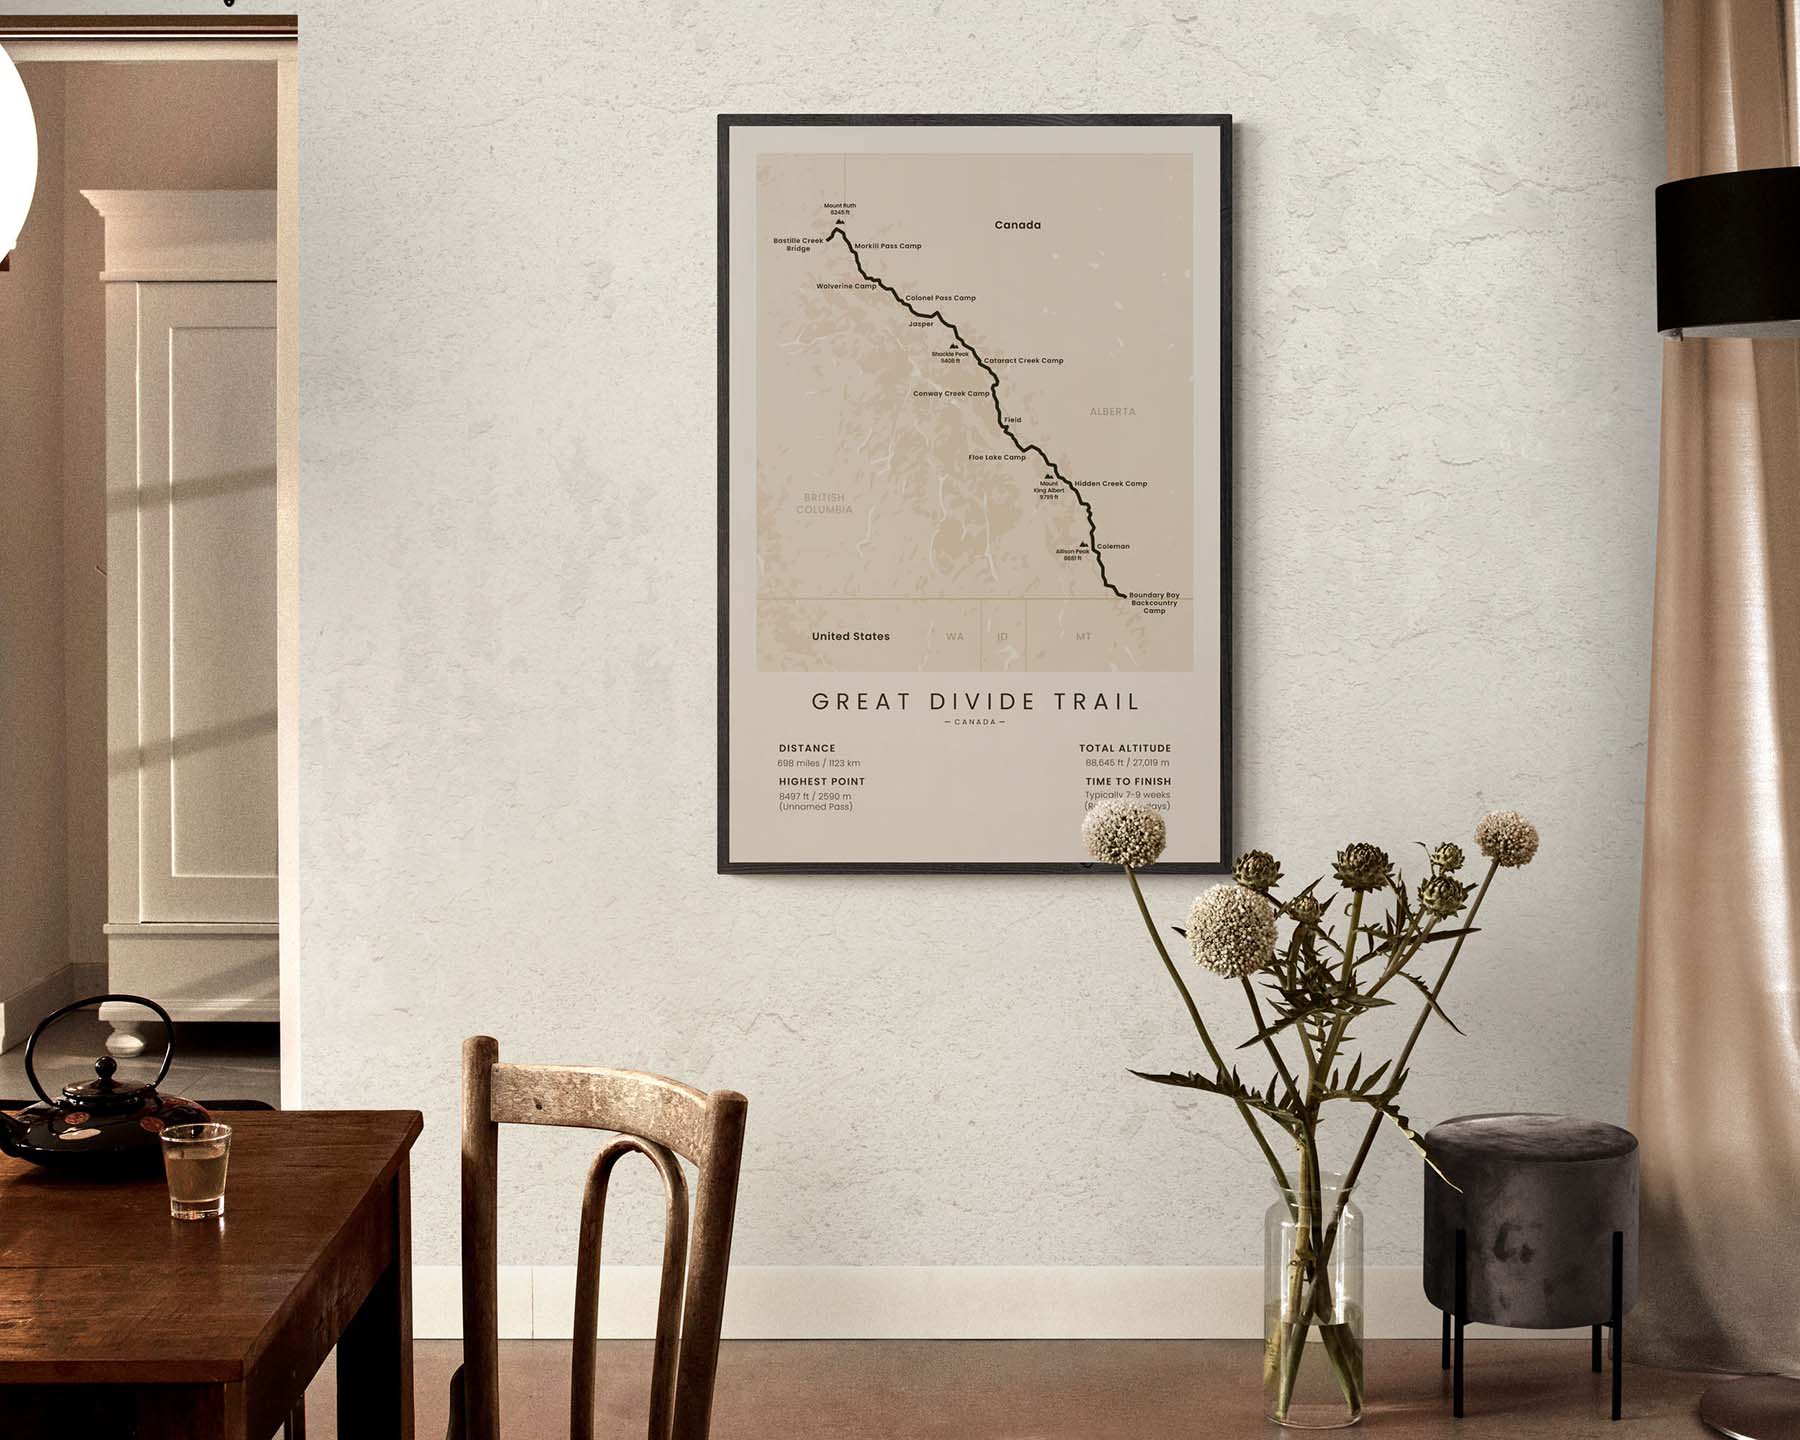 Great Divide Trail (Waterton Lakes National Park to Kakwa Provincial Park) track wall art in minimal room decor